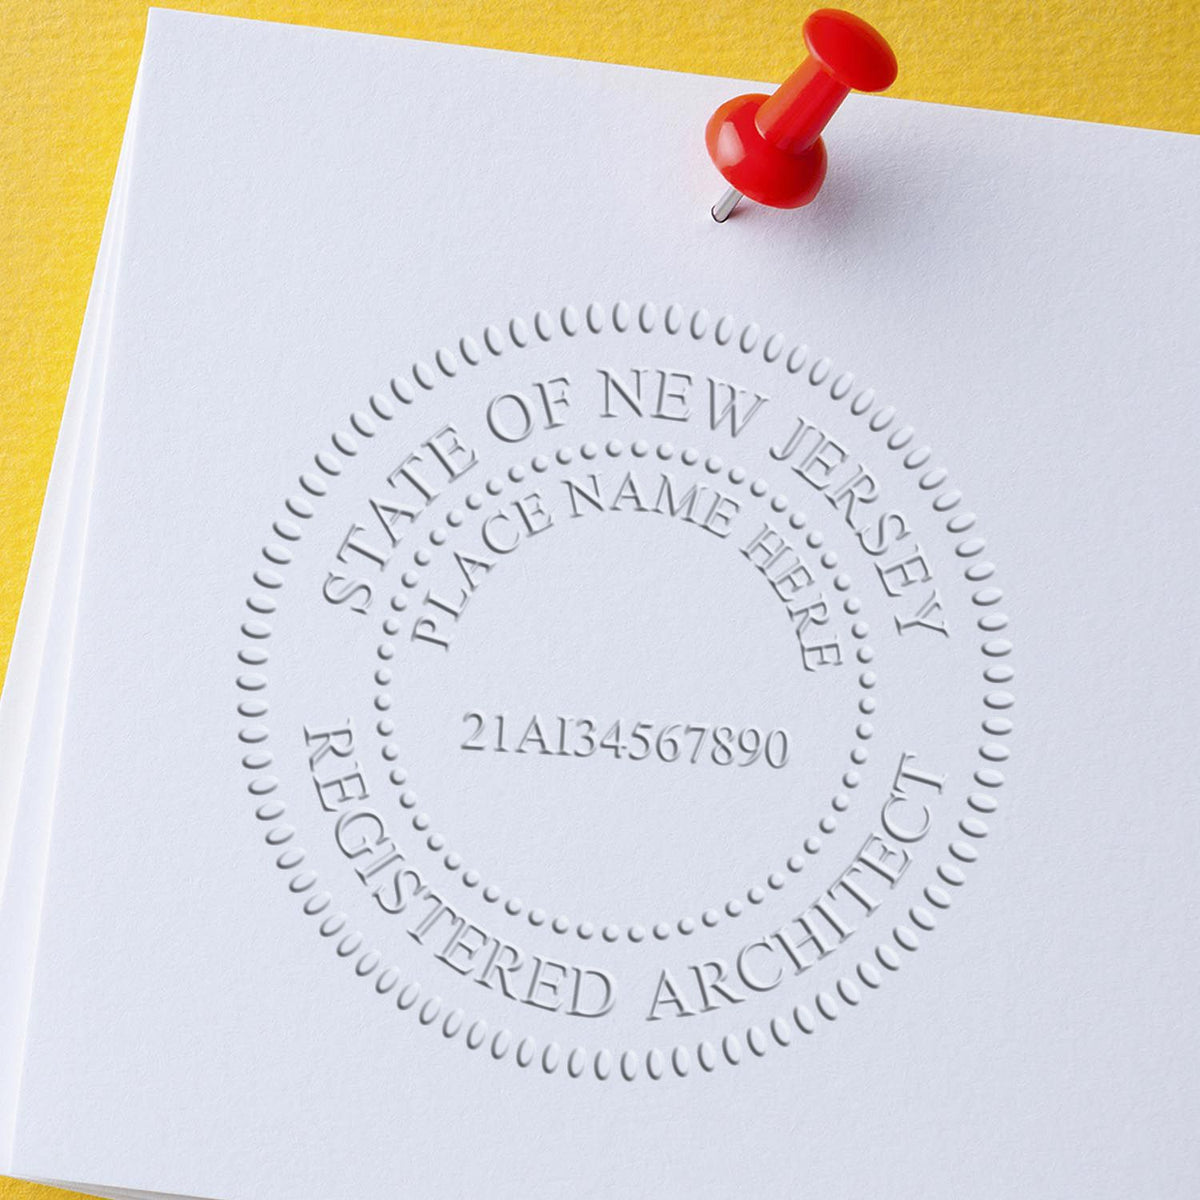 A stamped impression of the New Jersey Desk Architect Embossing Seal in this stylish lifestyle photo, setting the tone for a unique and personalized product.